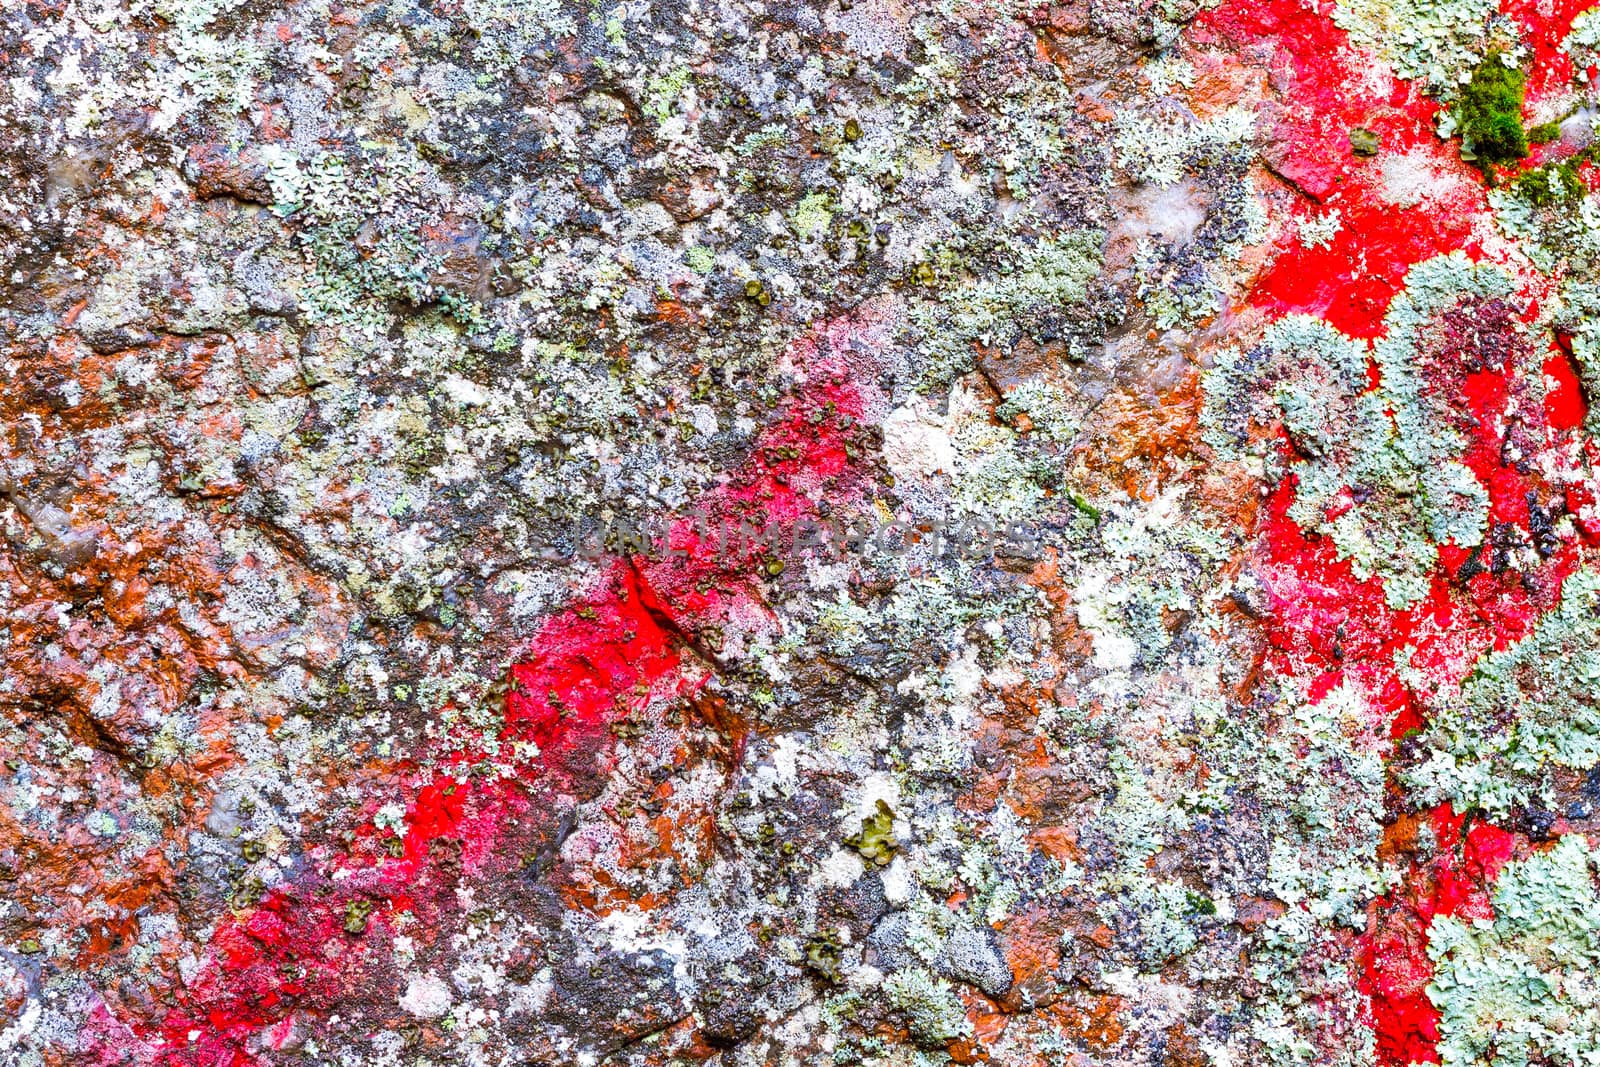 Natural colorful rock background with red paint